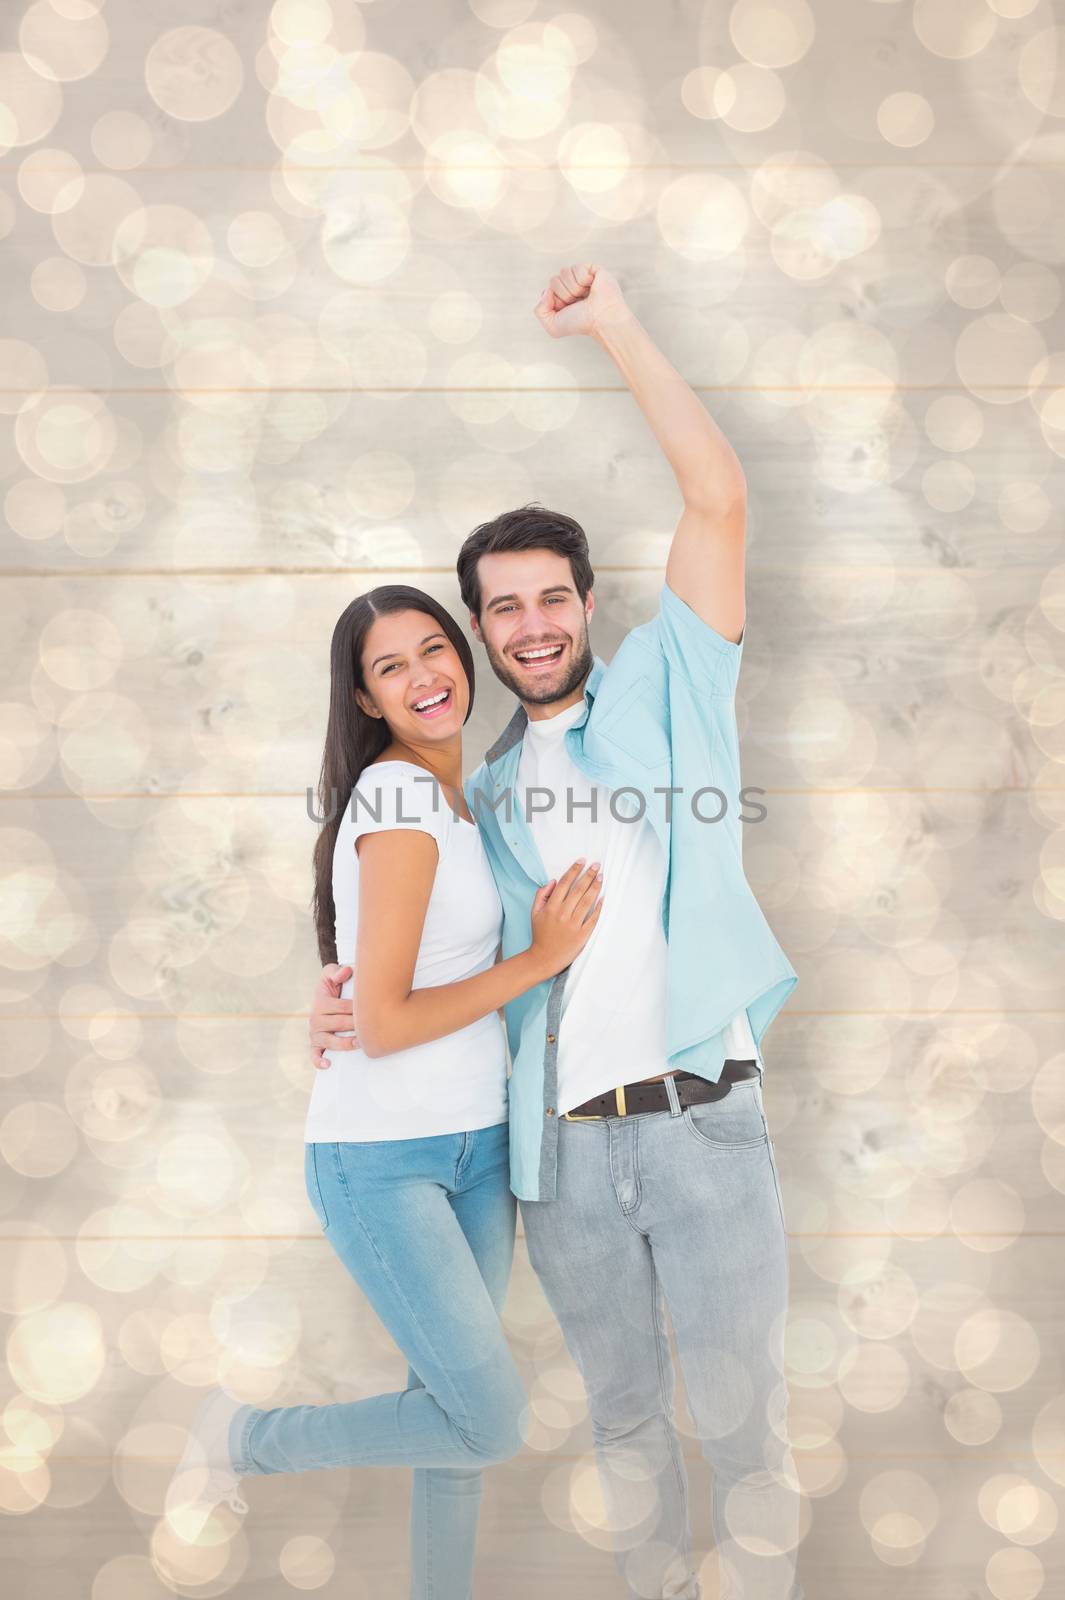 Happy casual couple cheering at camera against light glowing dots design pattern